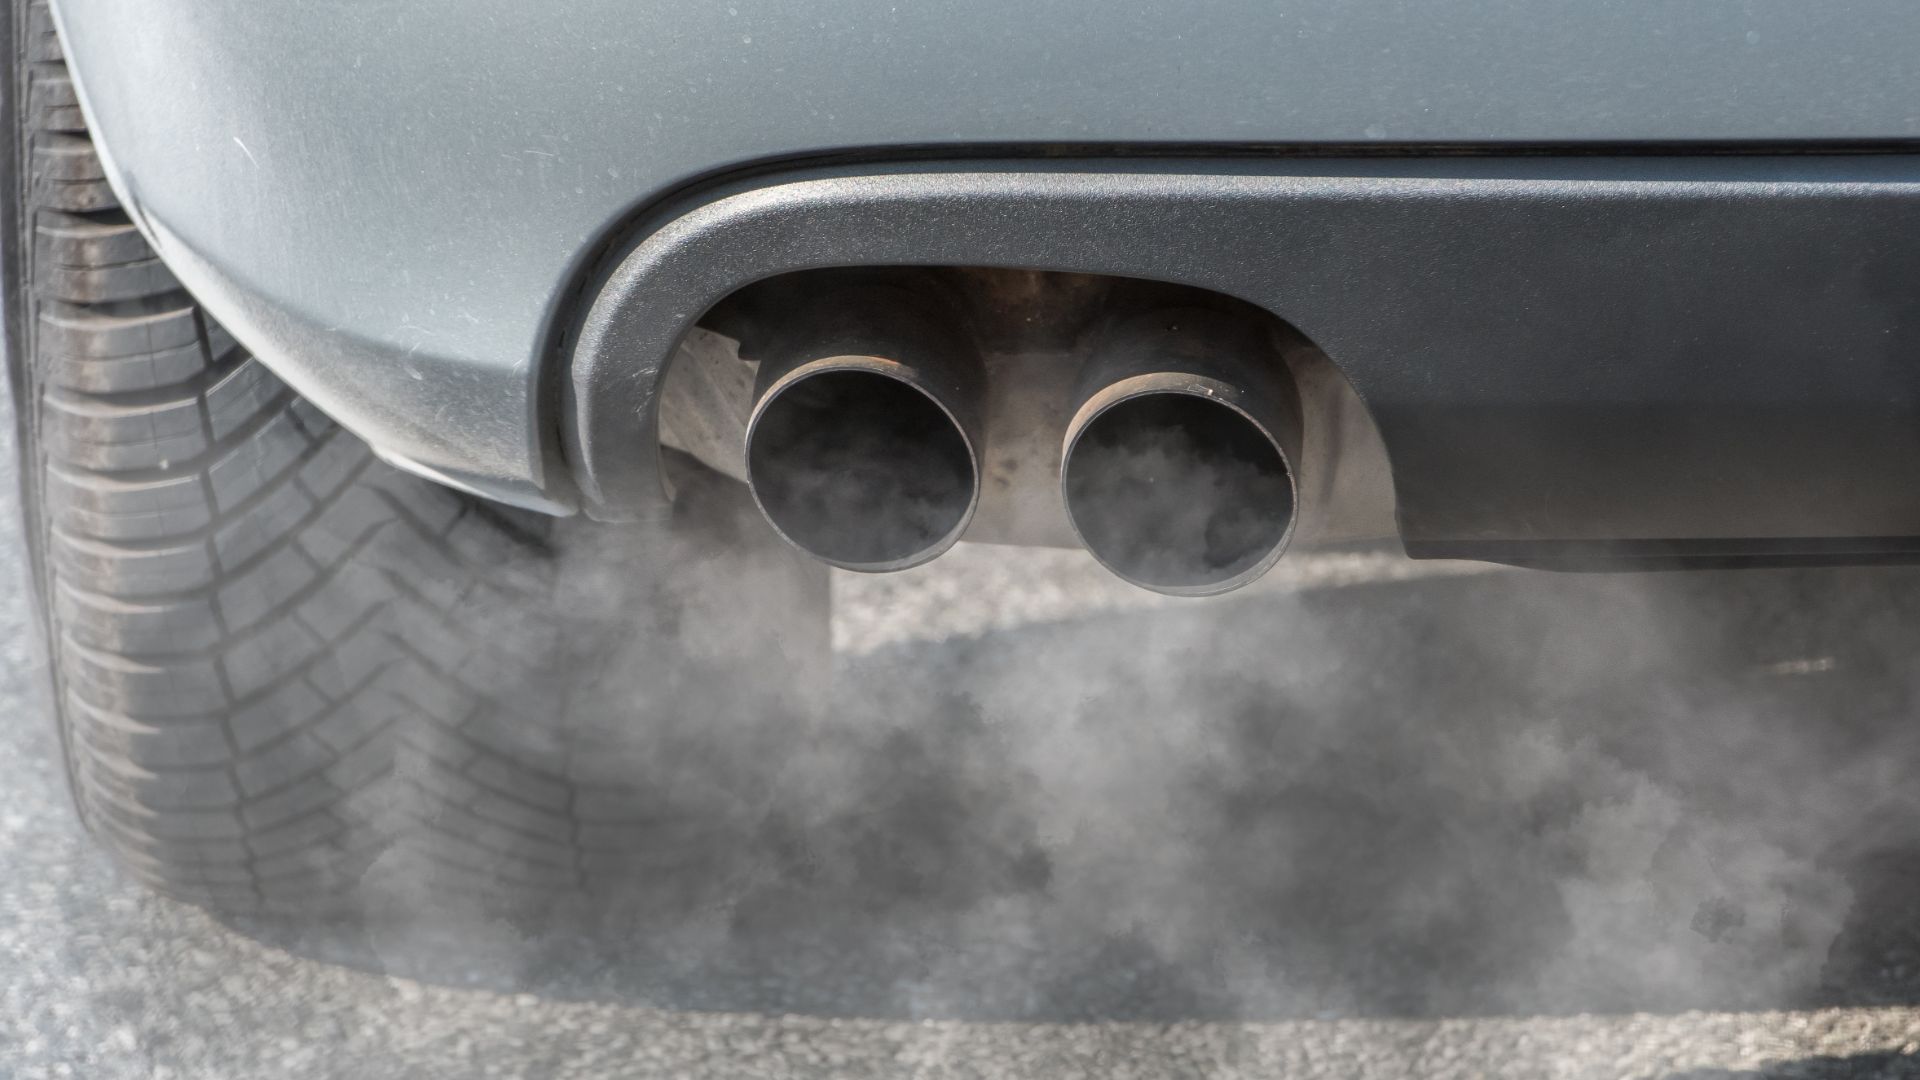 Electric cars not enough to improve air quality in isolation